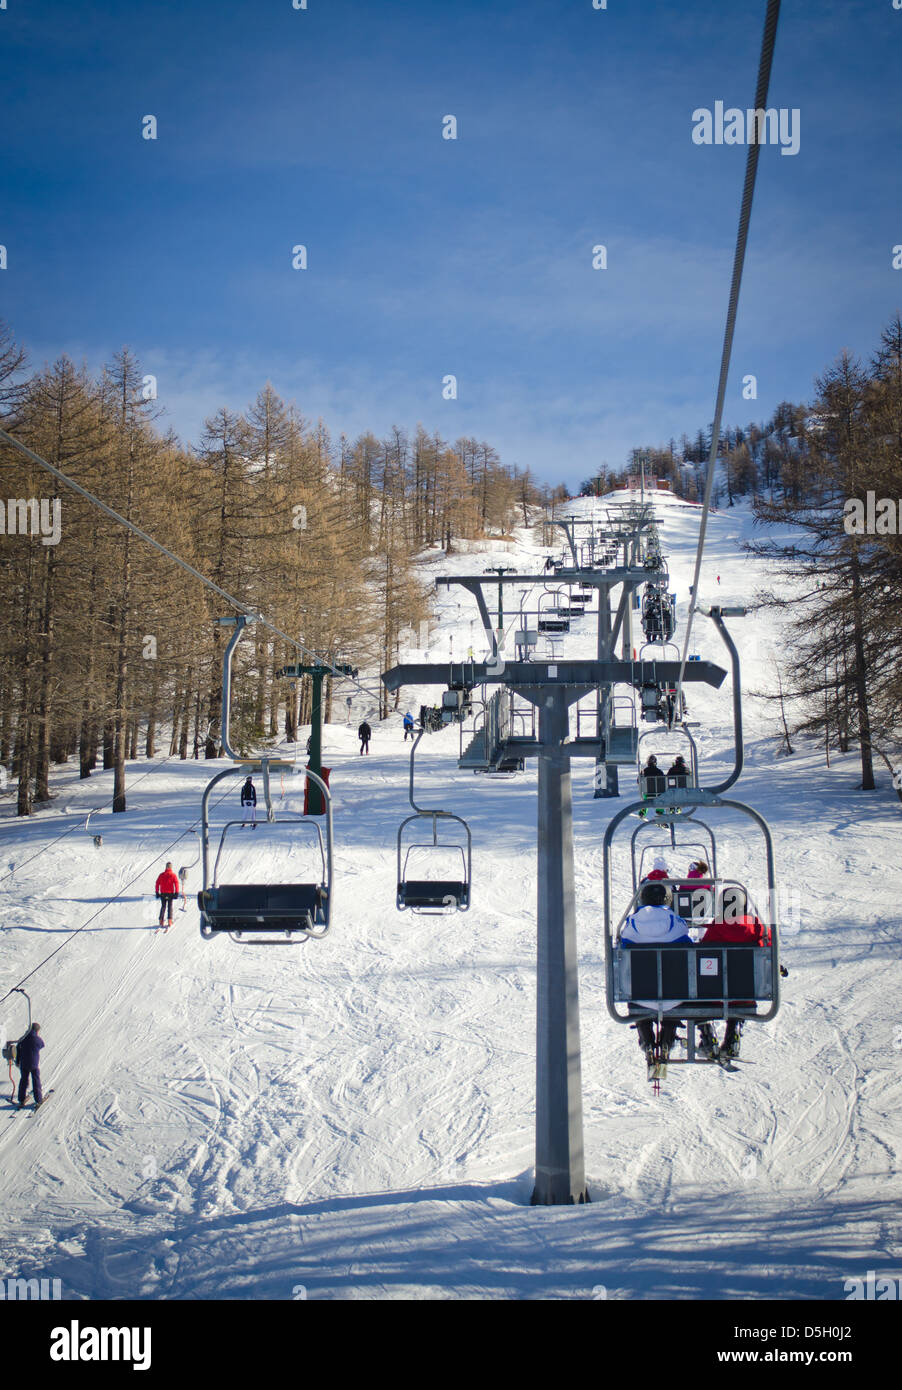 People and skiers on chairlift (aerial lift) and skilift in sunny day Stock Photo